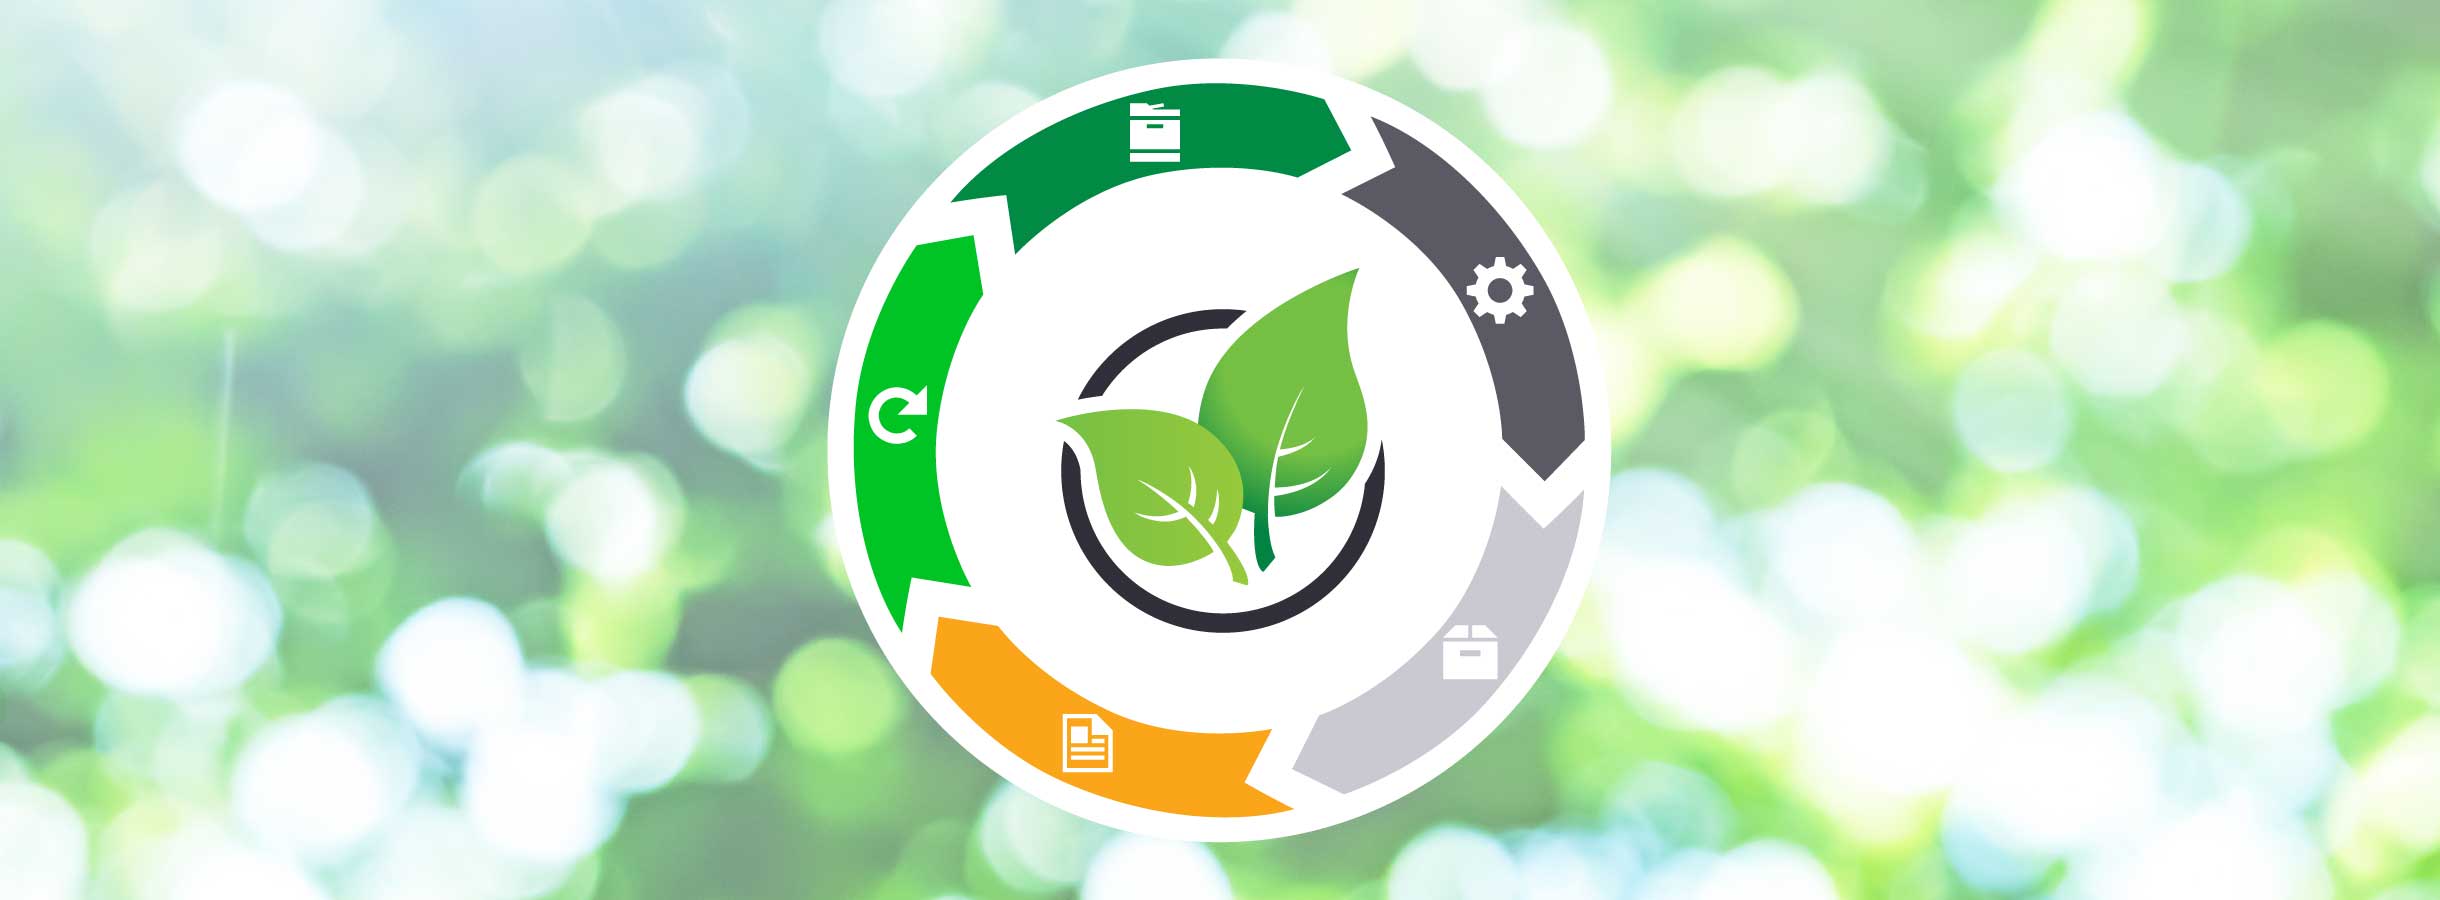 Illustration of the born-circular design of sustainable Lexmark consumables.